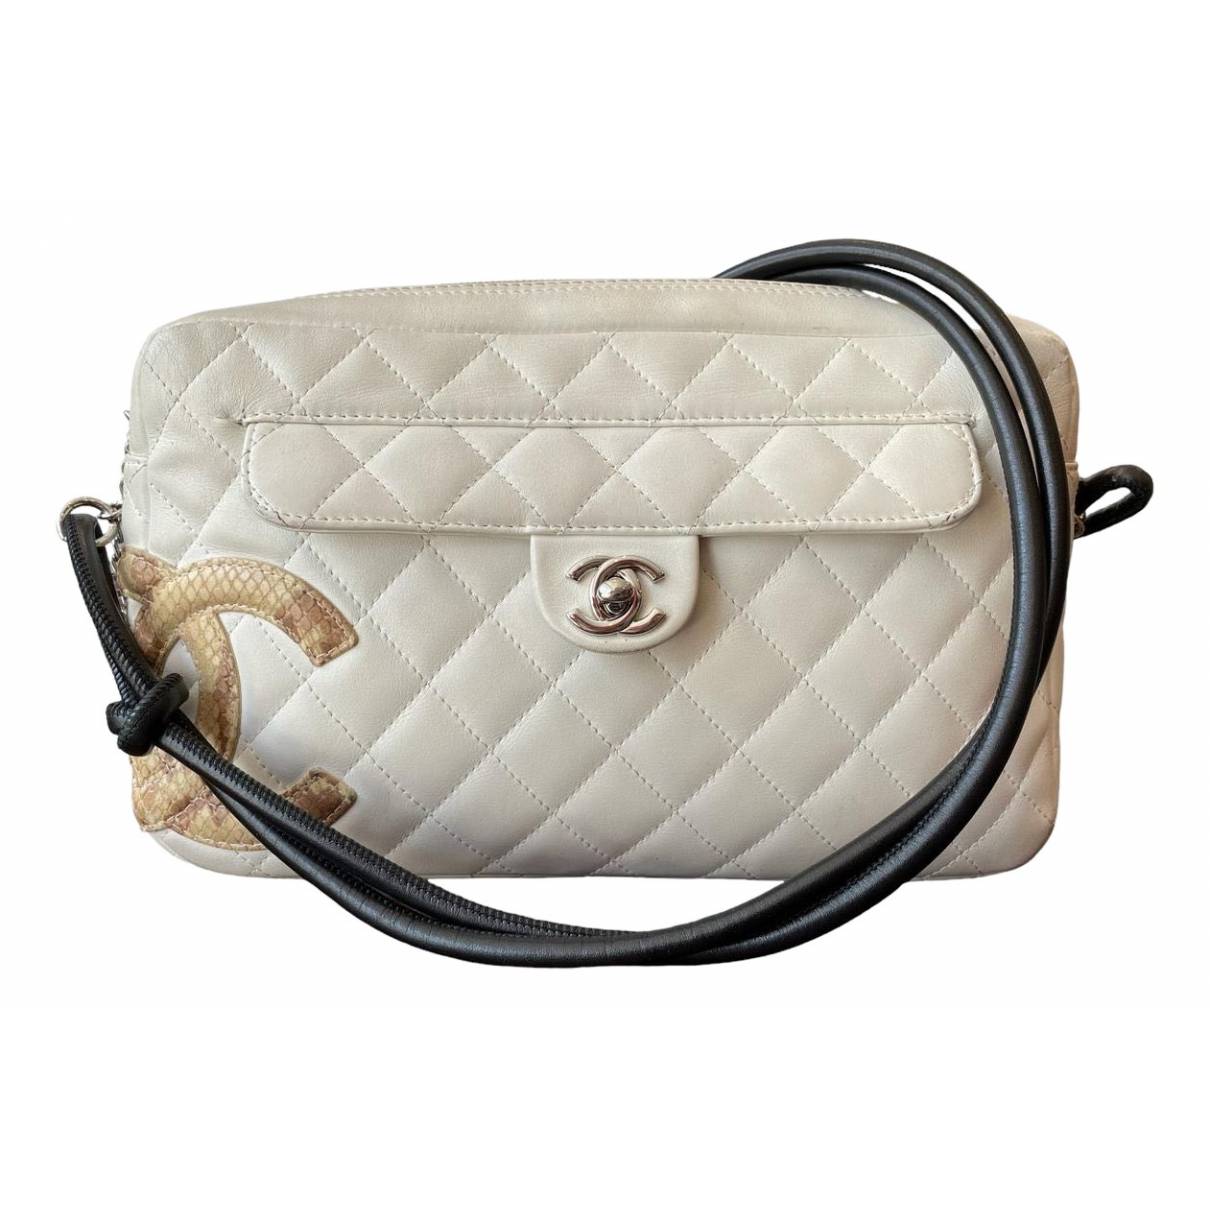 Camera leather handbag Chanel White in Leather - 33113301